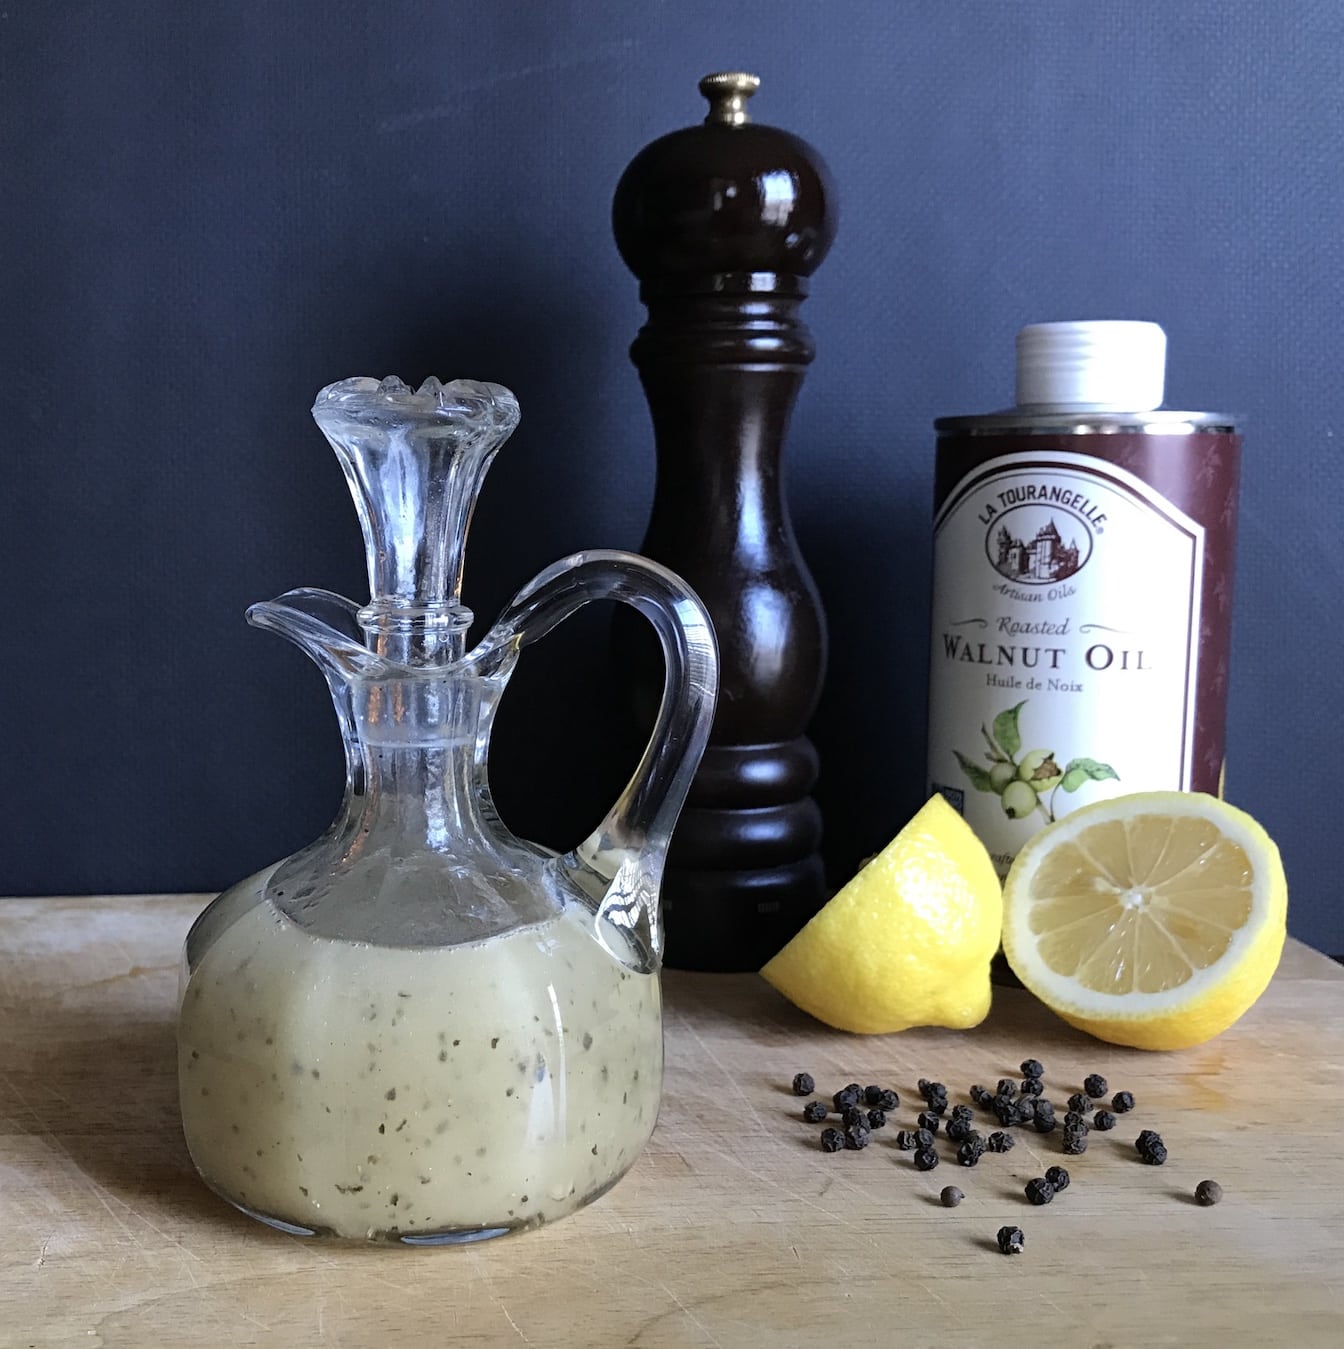 A glass carafe of walnut oil salad dressing with a pepper grinder, cut lemon, peppercorns and a bottle of walnut oil on a wood board.